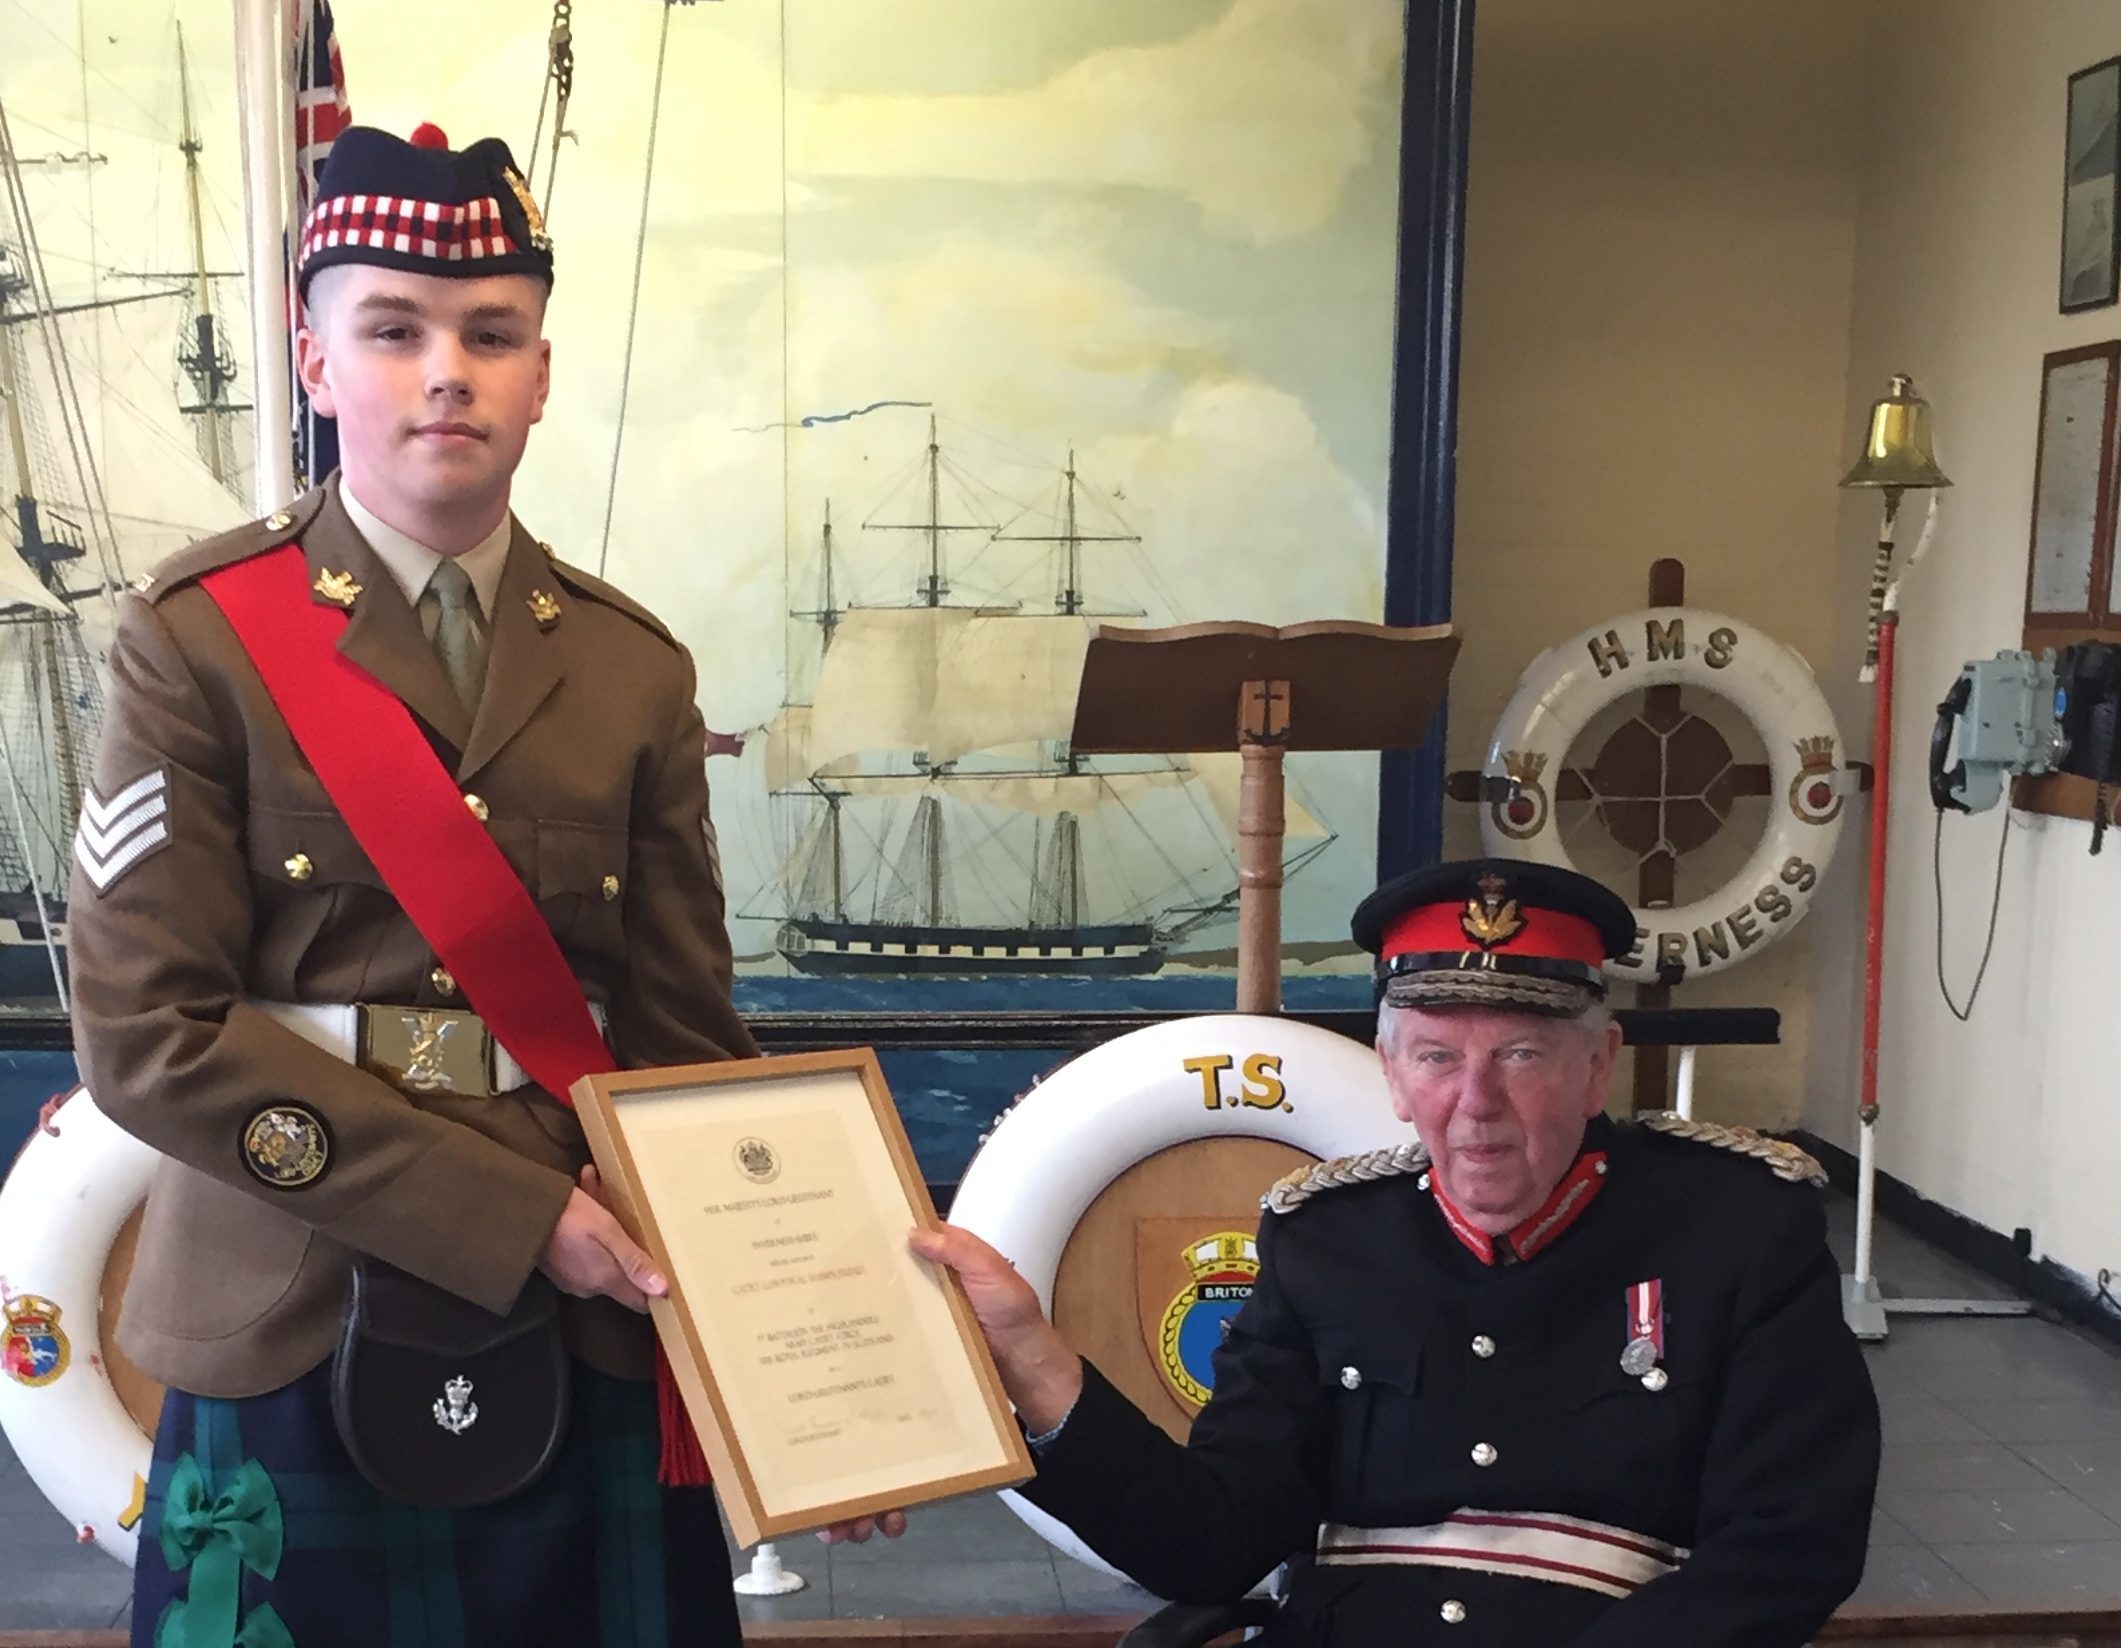 Sergeant Shawn Feeney receiving his Lord Lieutenant's Cadet Certificate from Donald Cameron of Lochiel the Lord Lieutenant of Inverness